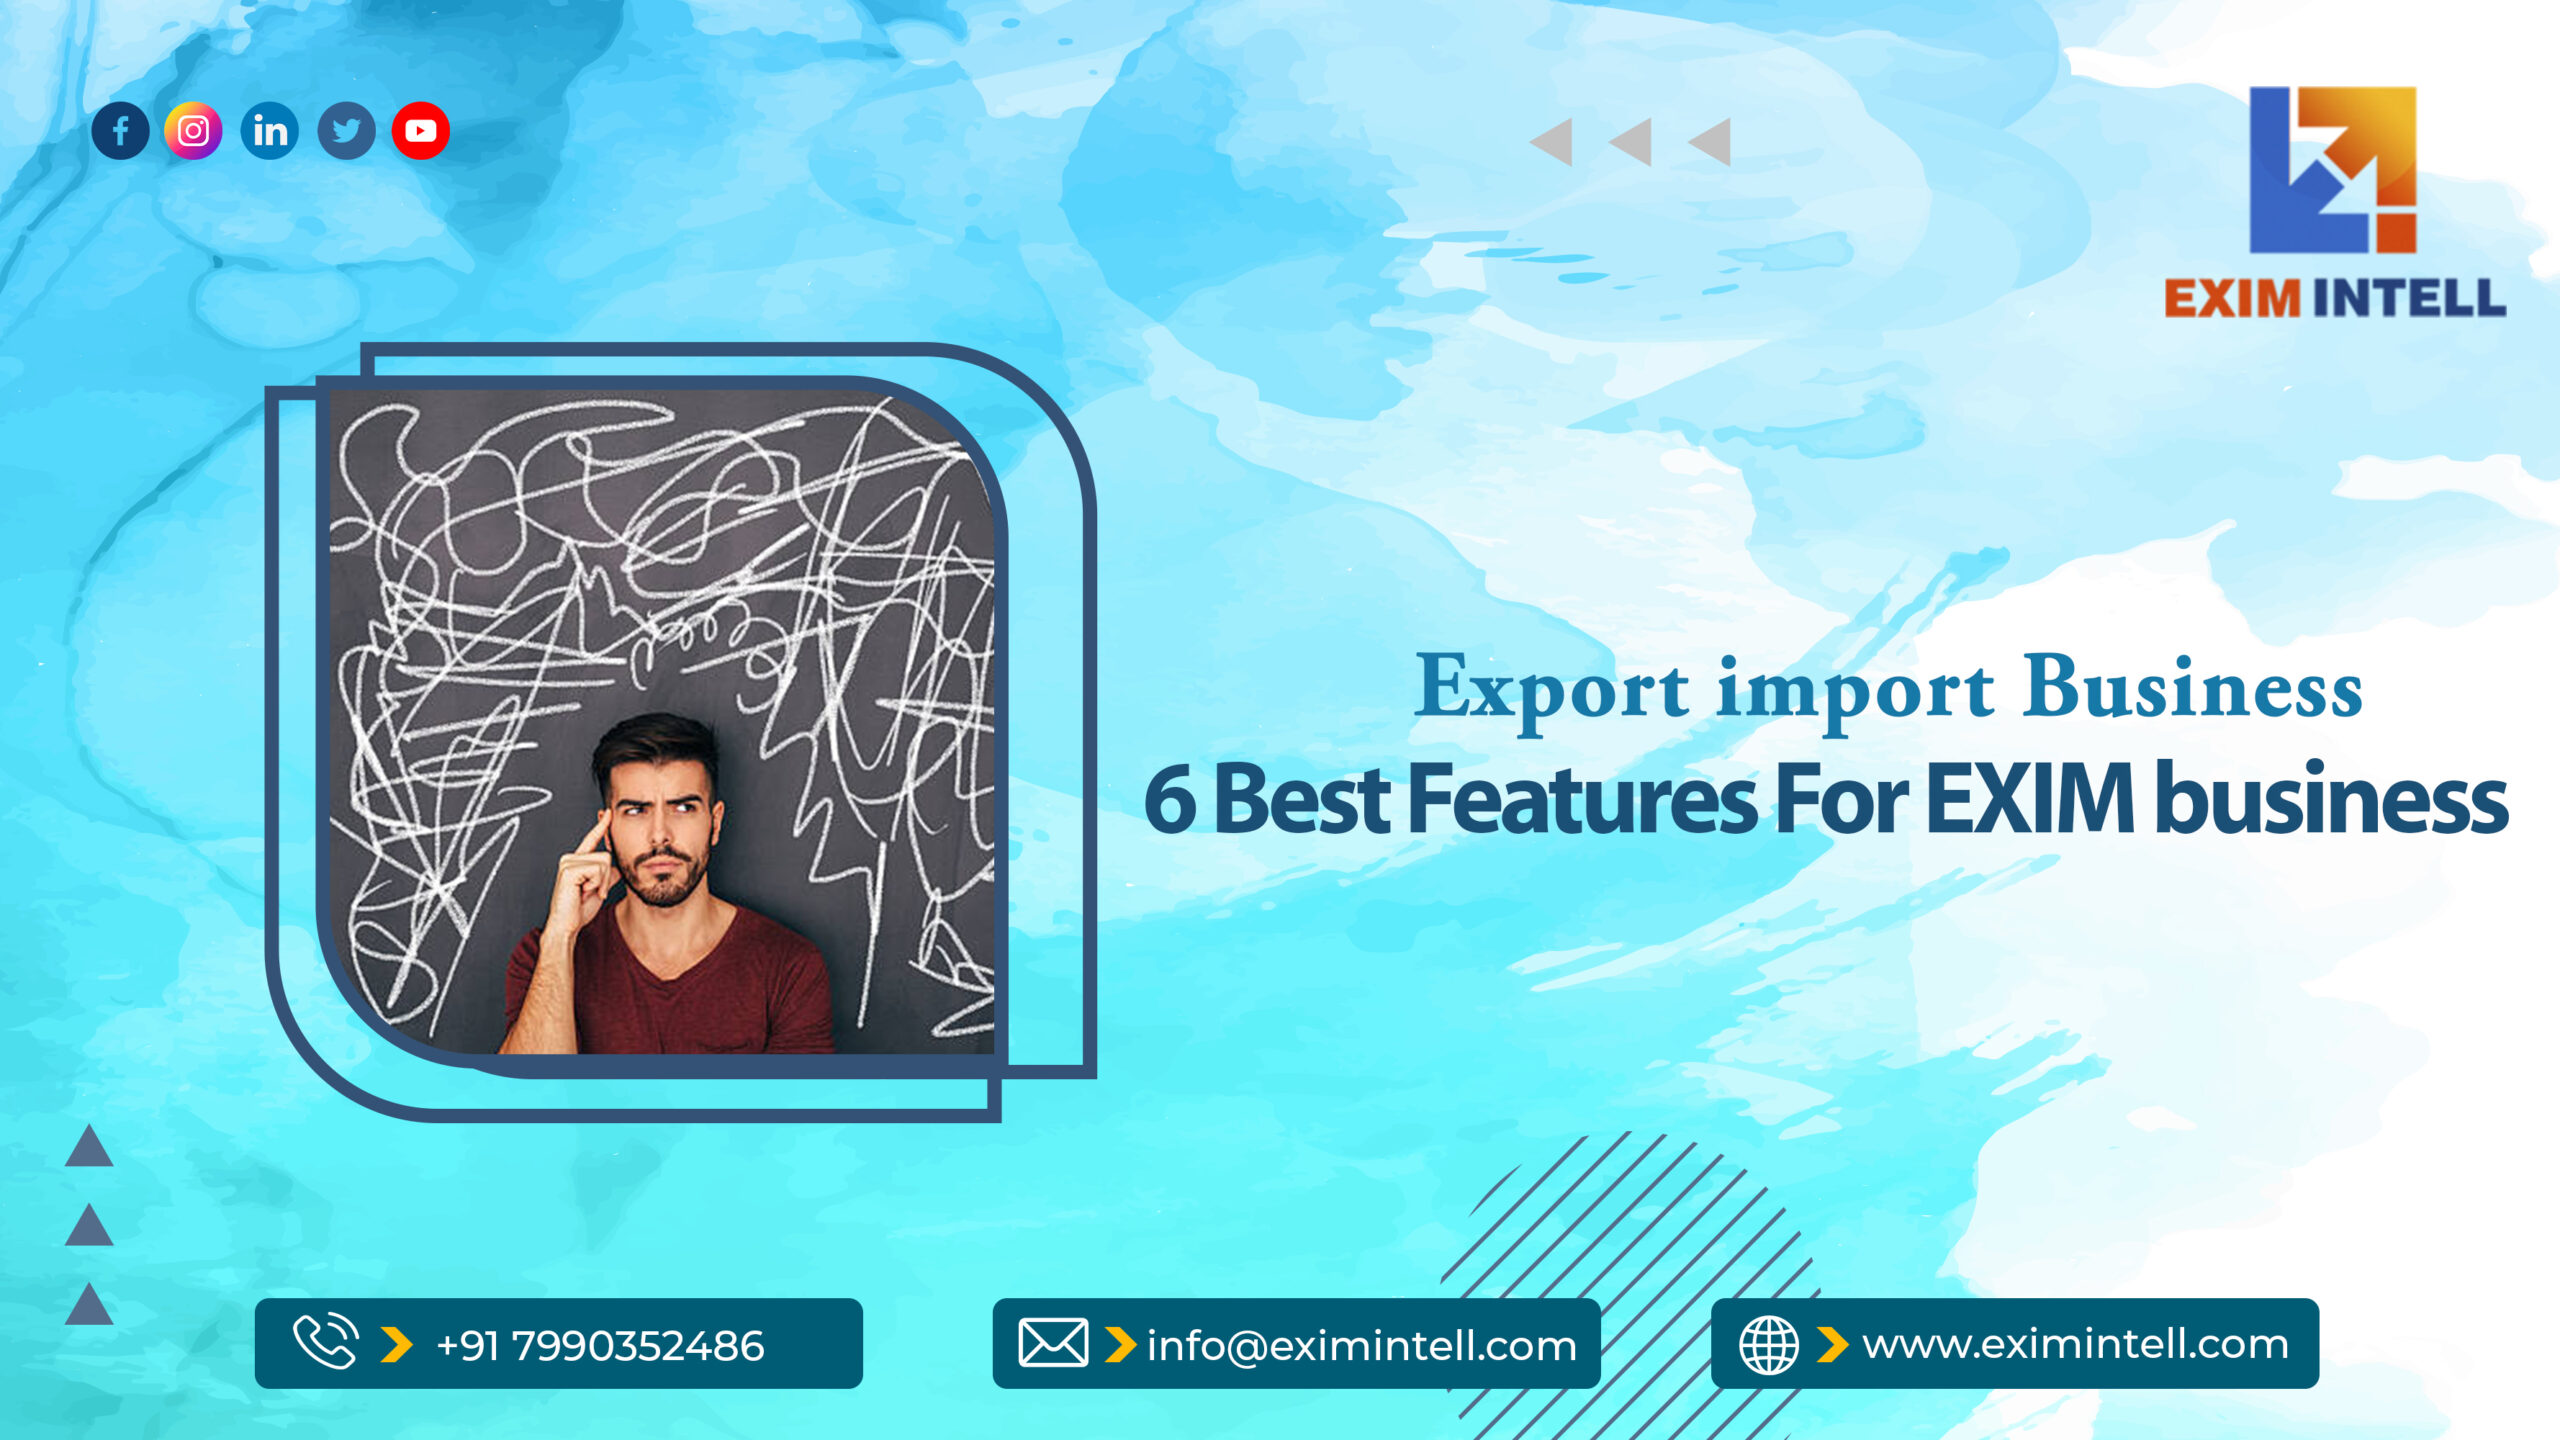 Export import Business- 6 Best Features For EXIM business